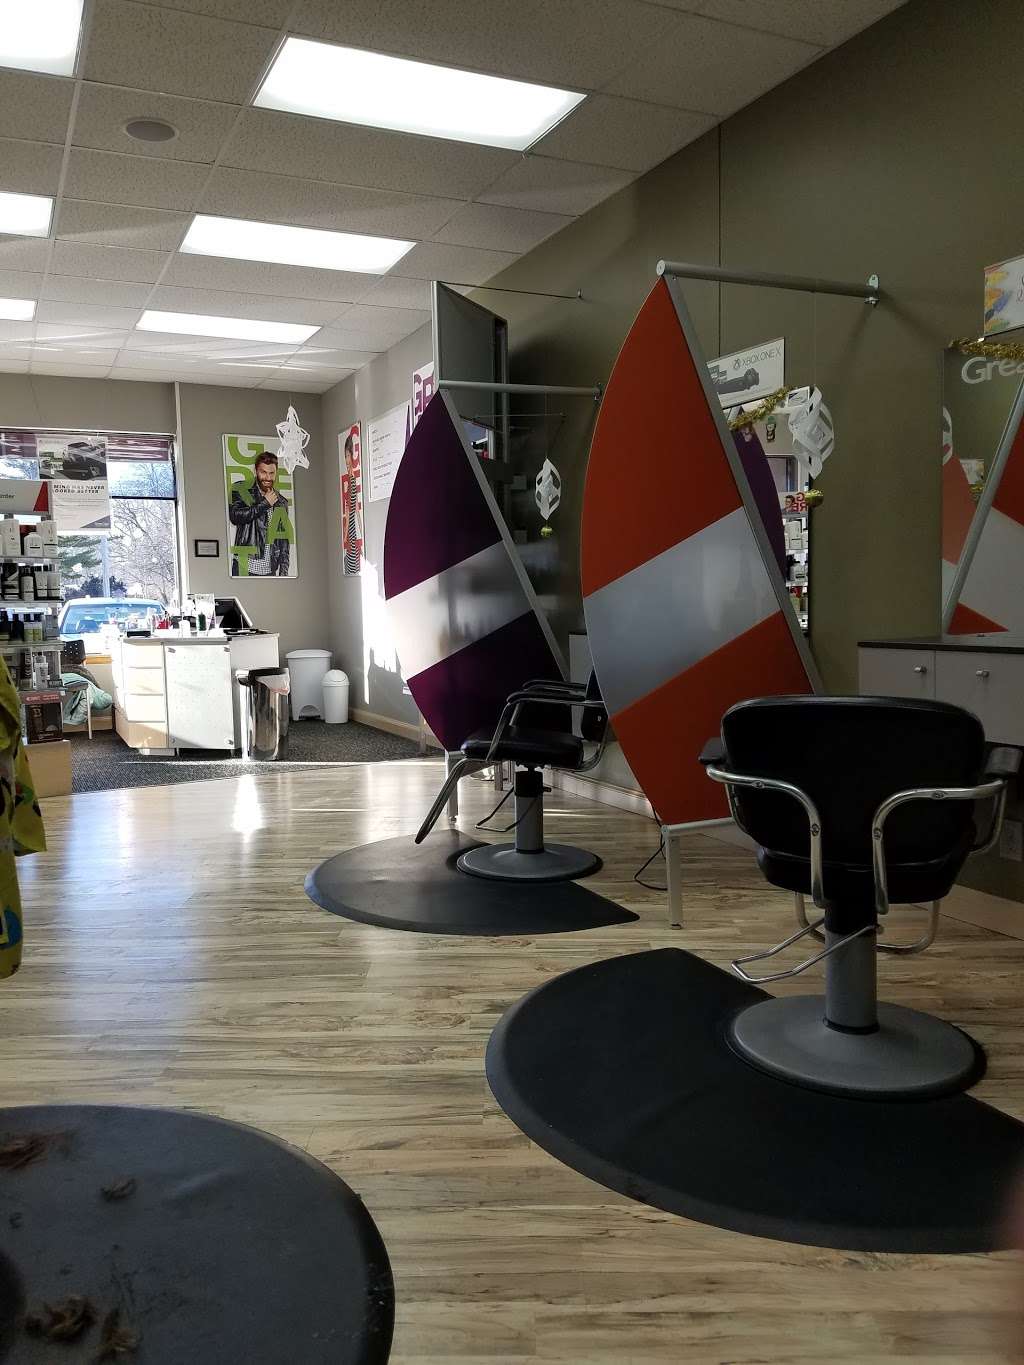 Great Clips | 5301 S 108th St Ste C, Hales Corners, WI 53130 | Phone: (414) 425-6170